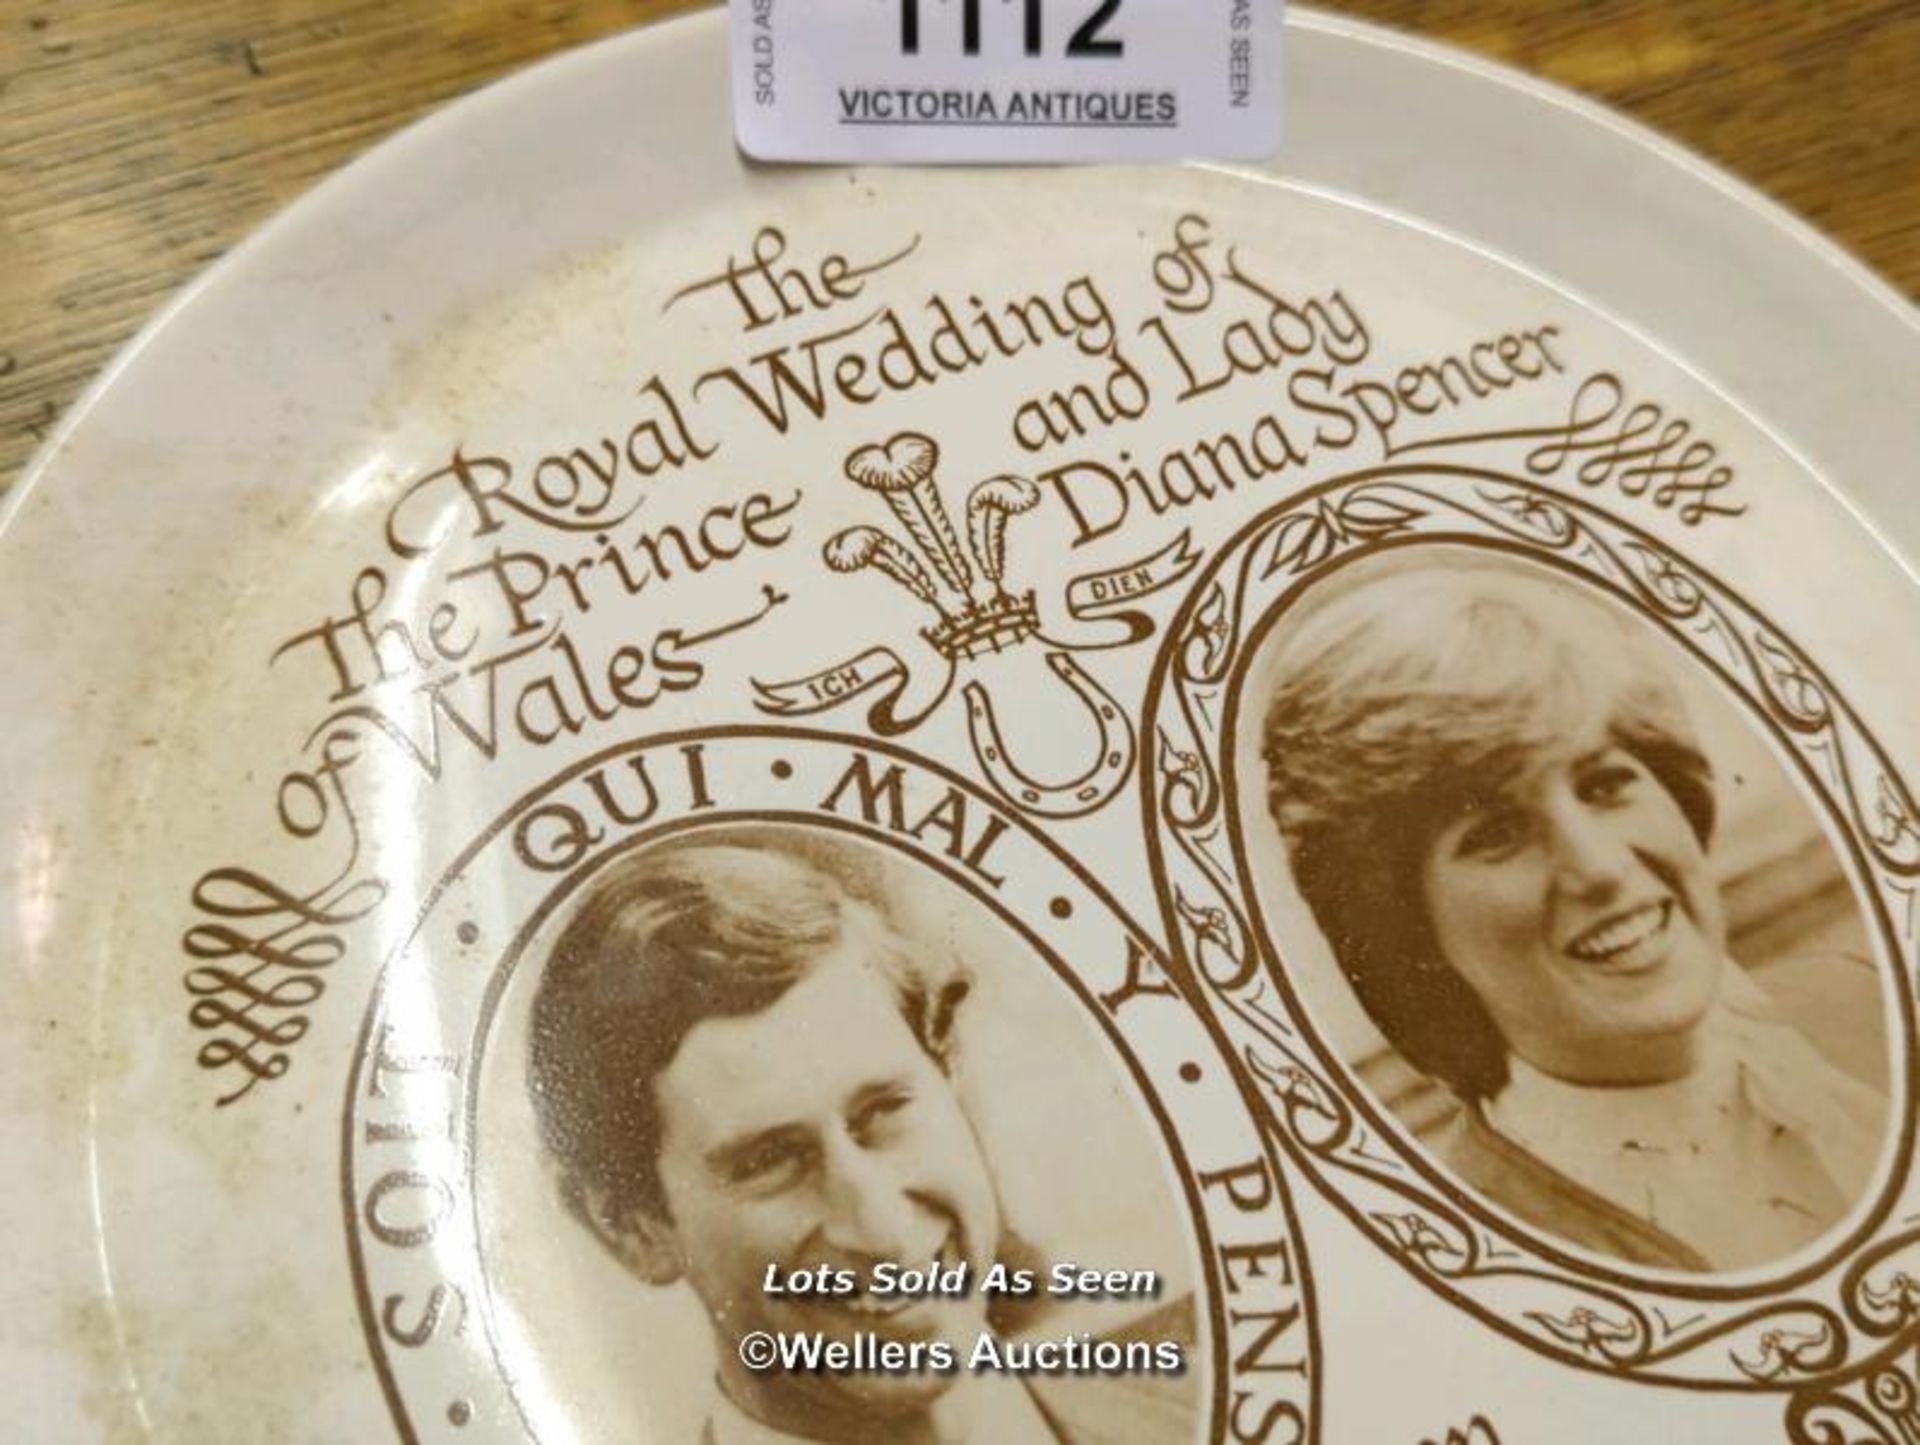 *HONITON POTTERY COMMEMORATIVE PLATE OF THE ROYAL WEDDING OF CHARLES AND DIANA / LOCATED AT VICTORIA - Image 2 of 4